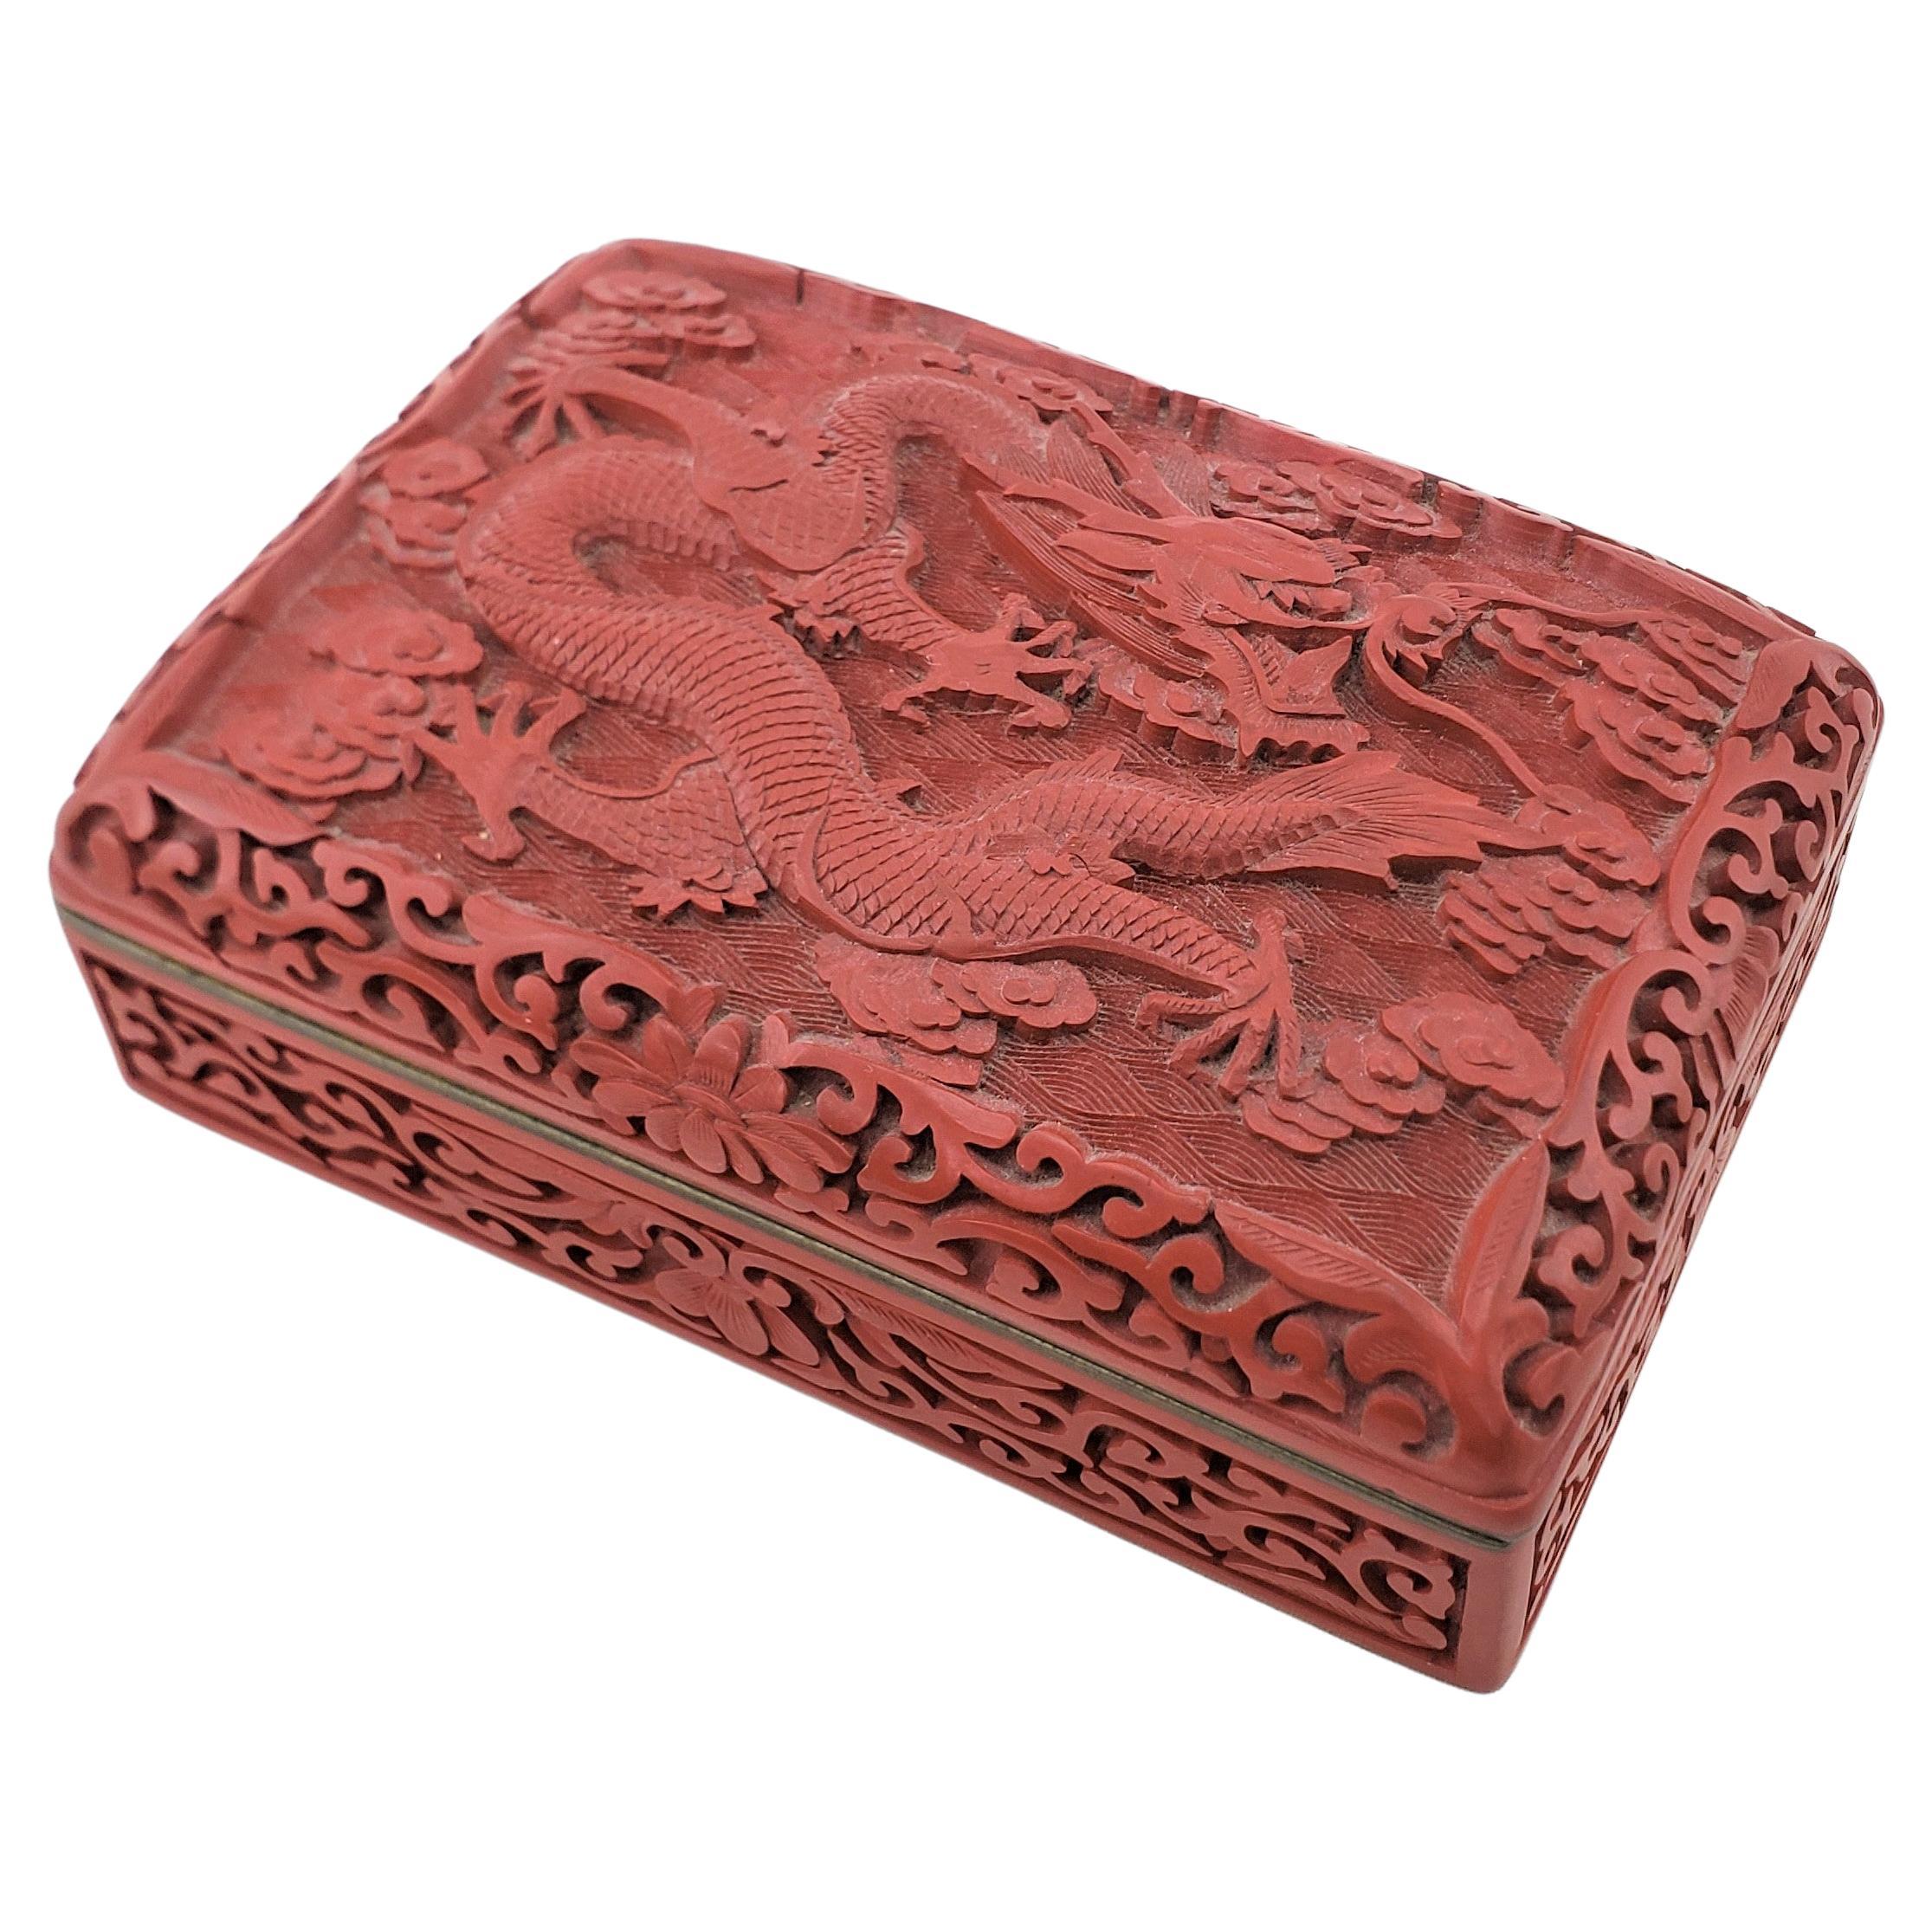 Antique Chinese Carved Cinnabar & Enamelled Box with Imperial Dragon Top